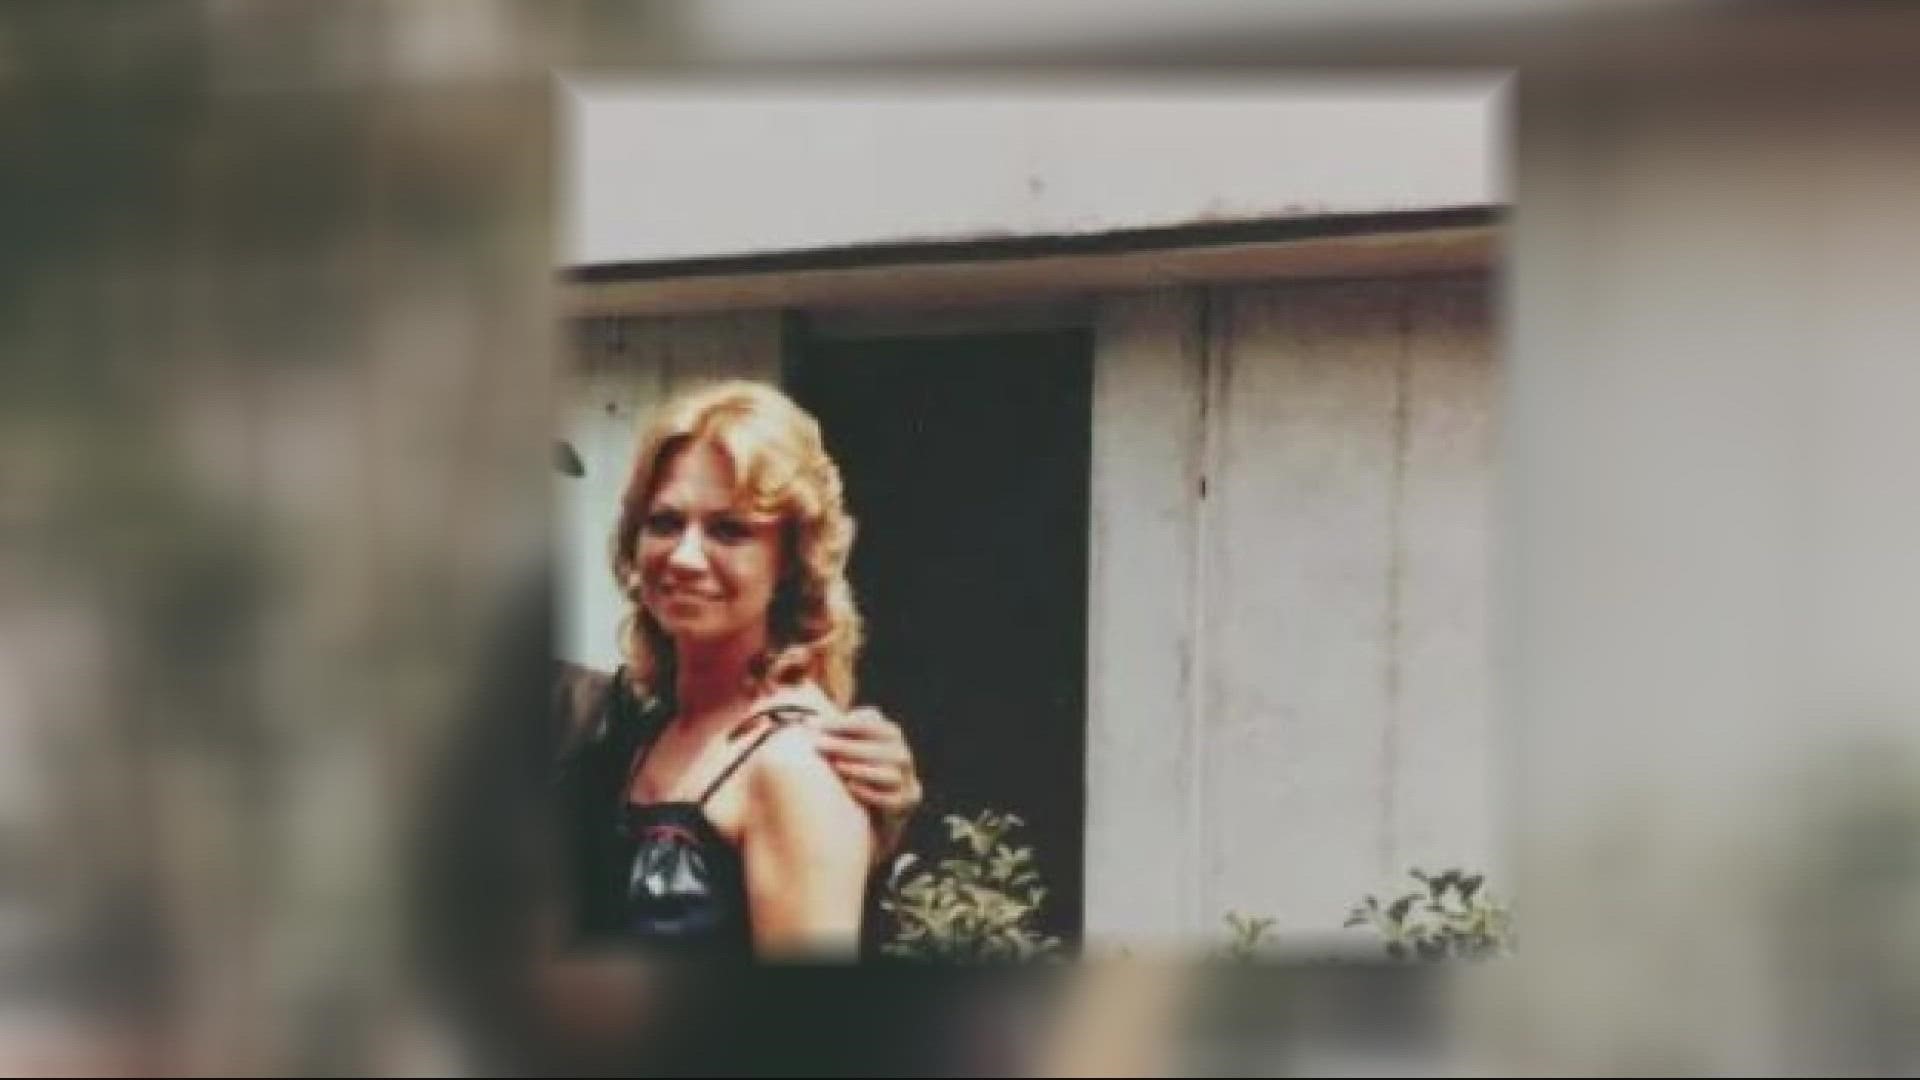 A cold case unit will be looking at cases that are still unsolved.